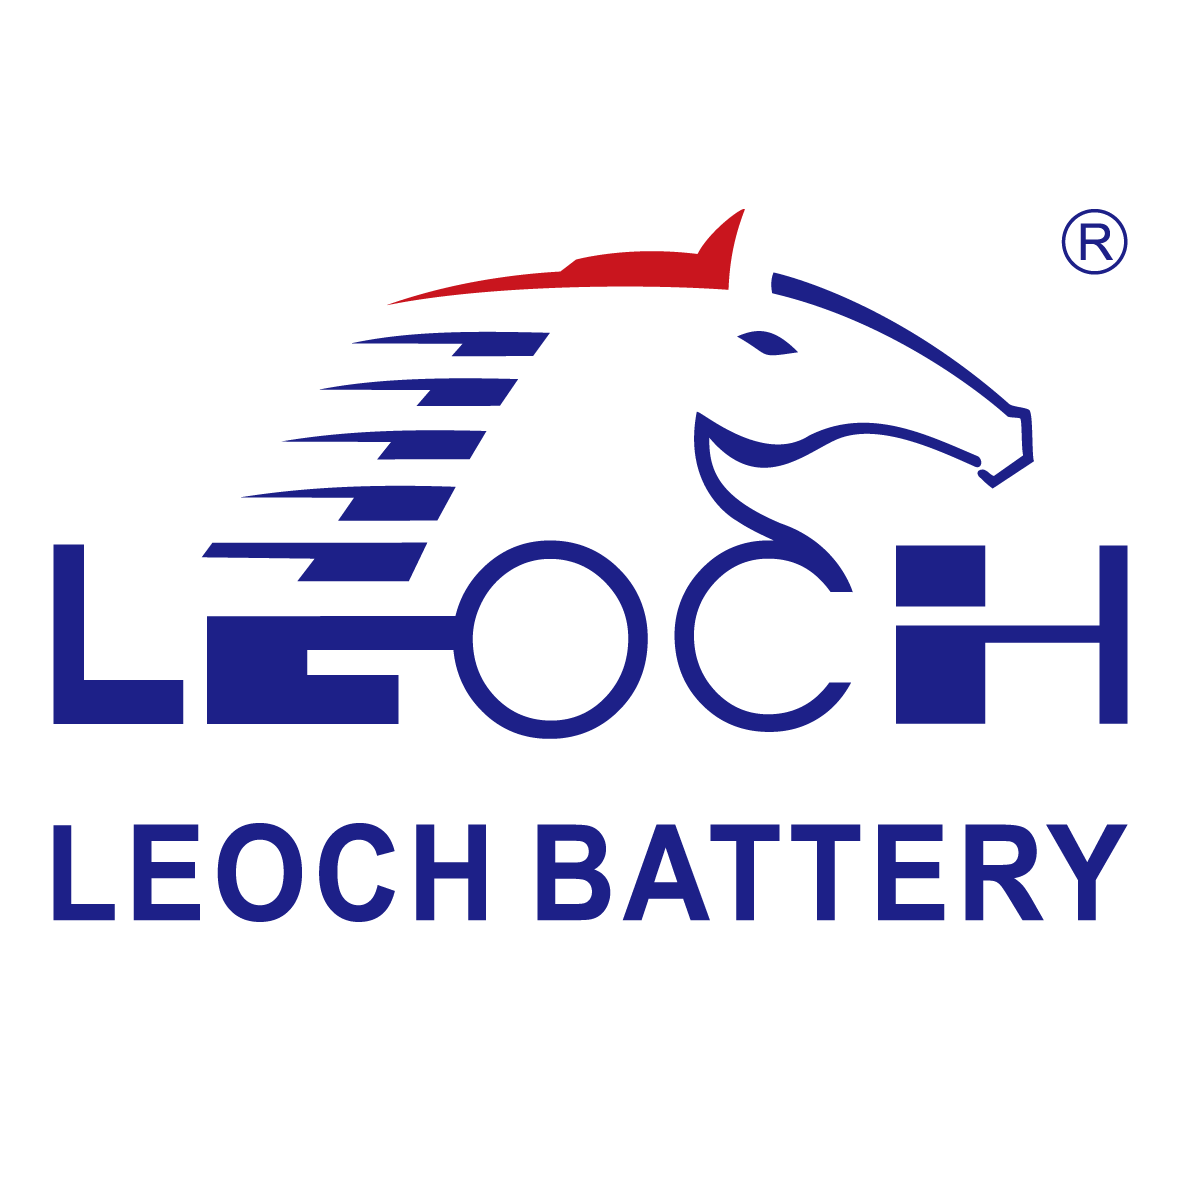  AJC Battery Compatible with Leoch LP12-9.0 12V 9Ah Sealed Lead  Acid Battery : Health & Household